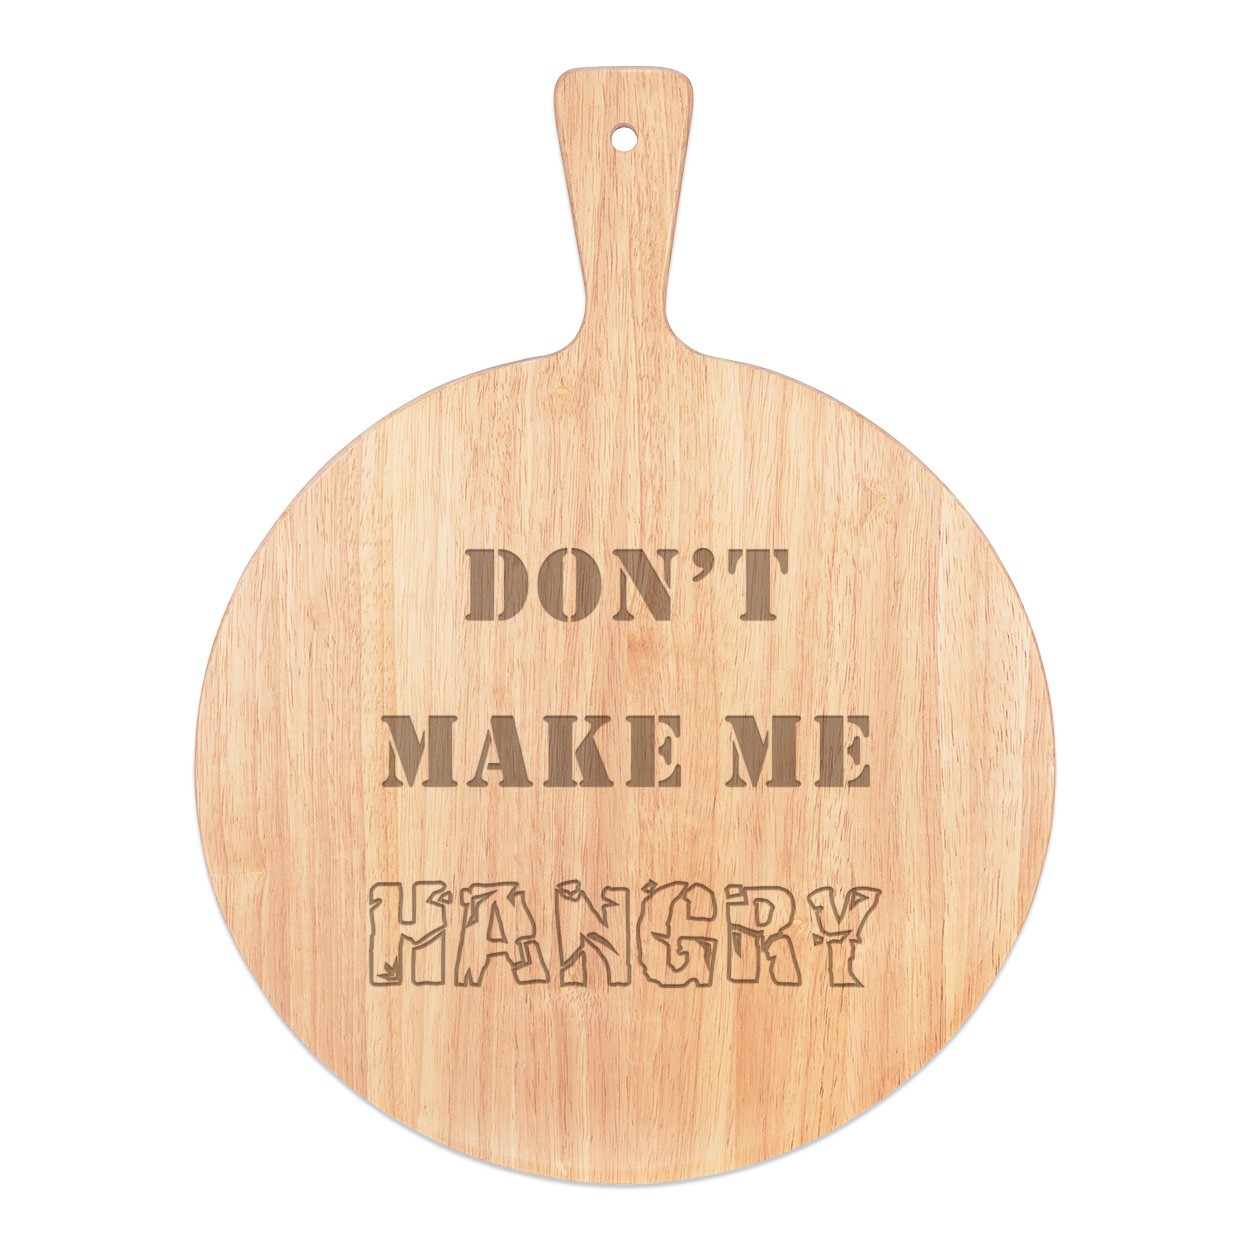 Don't Make Me Hangry Pizza Board Paddle Serving Tray Handle Round Wooden 45x34cm